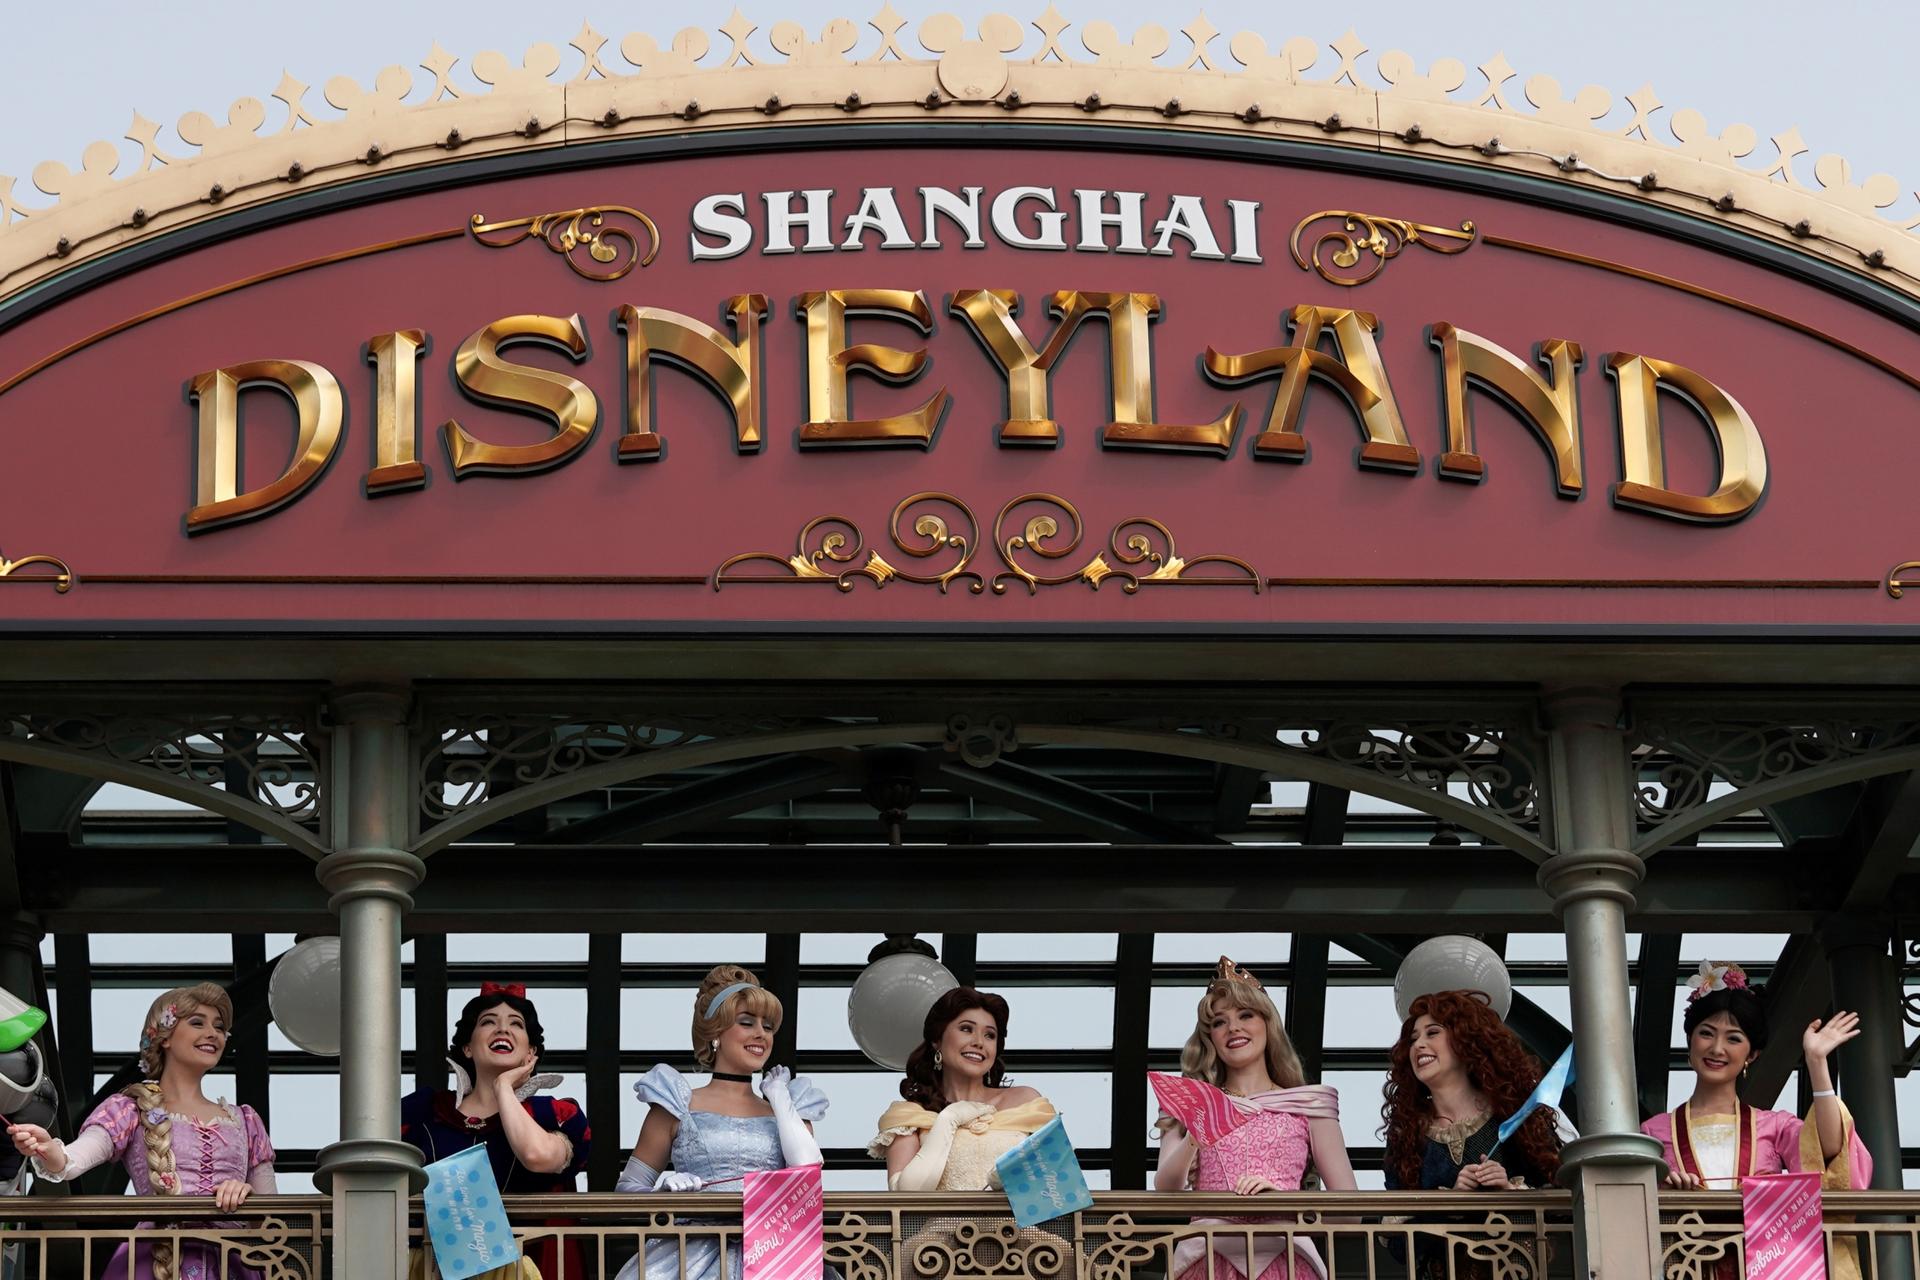 Disney characters appear on opening day at Shanghai Disneyland 